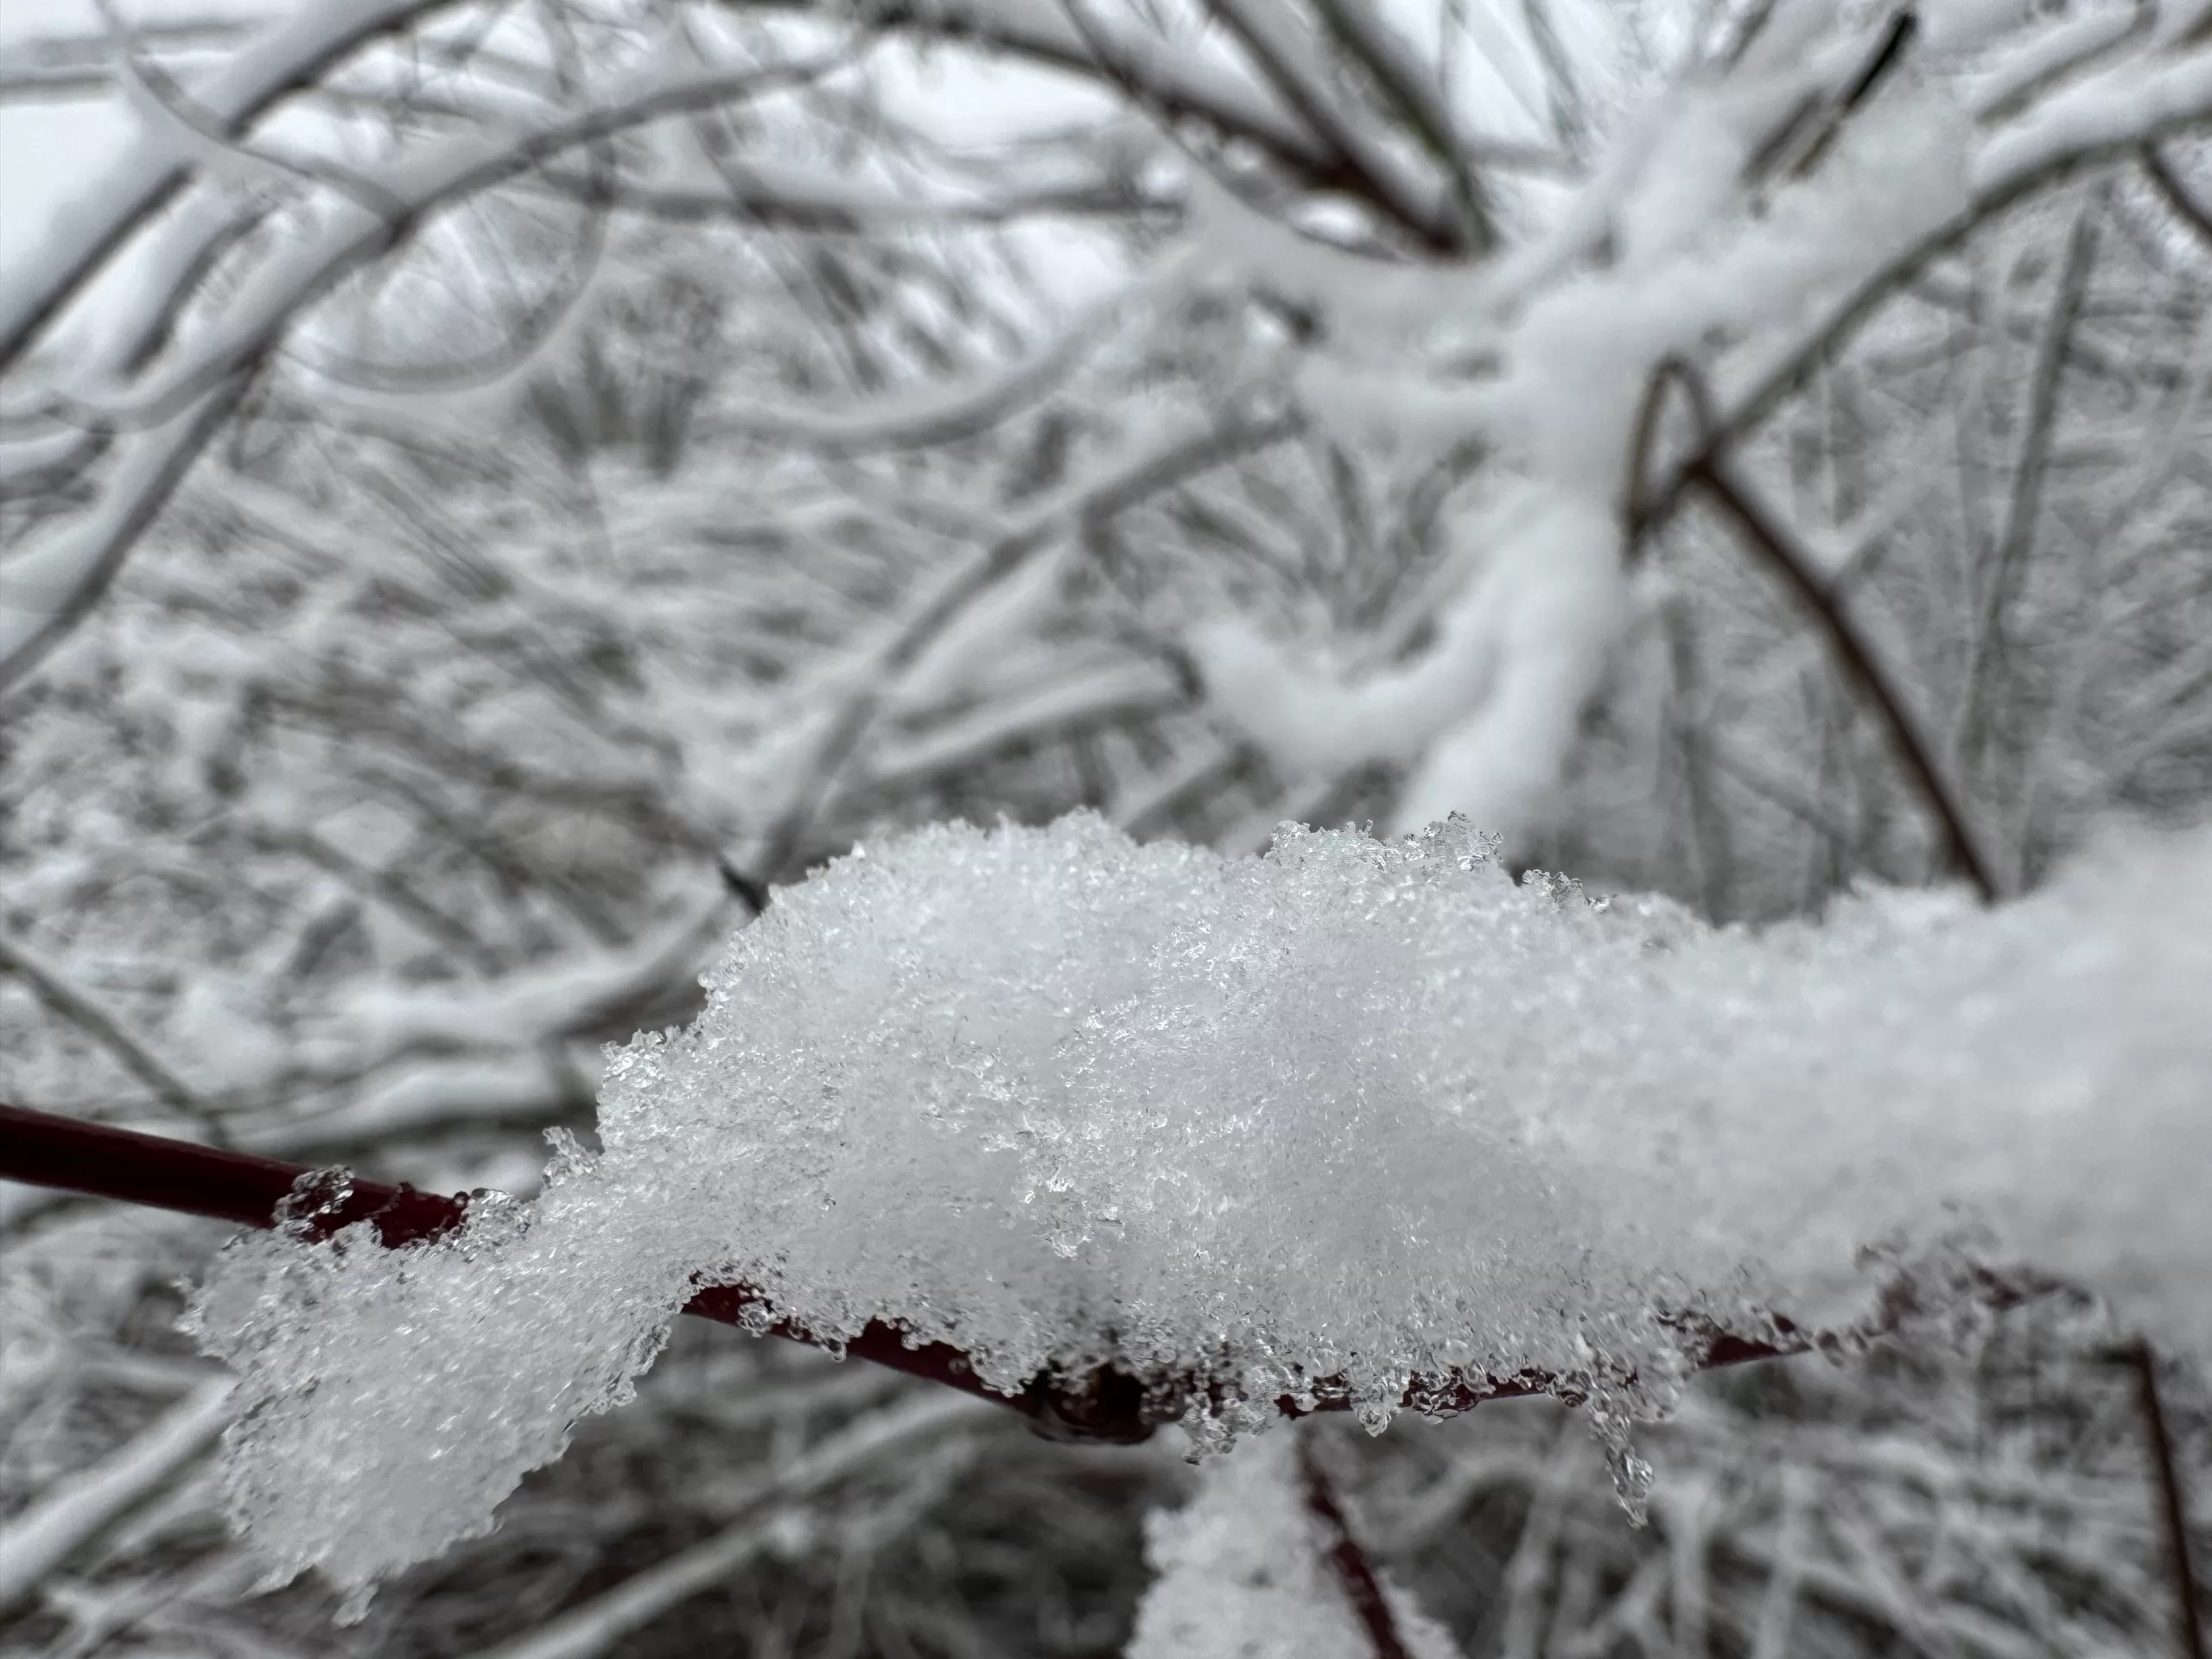 A close up of iced up snow on a bush branch.